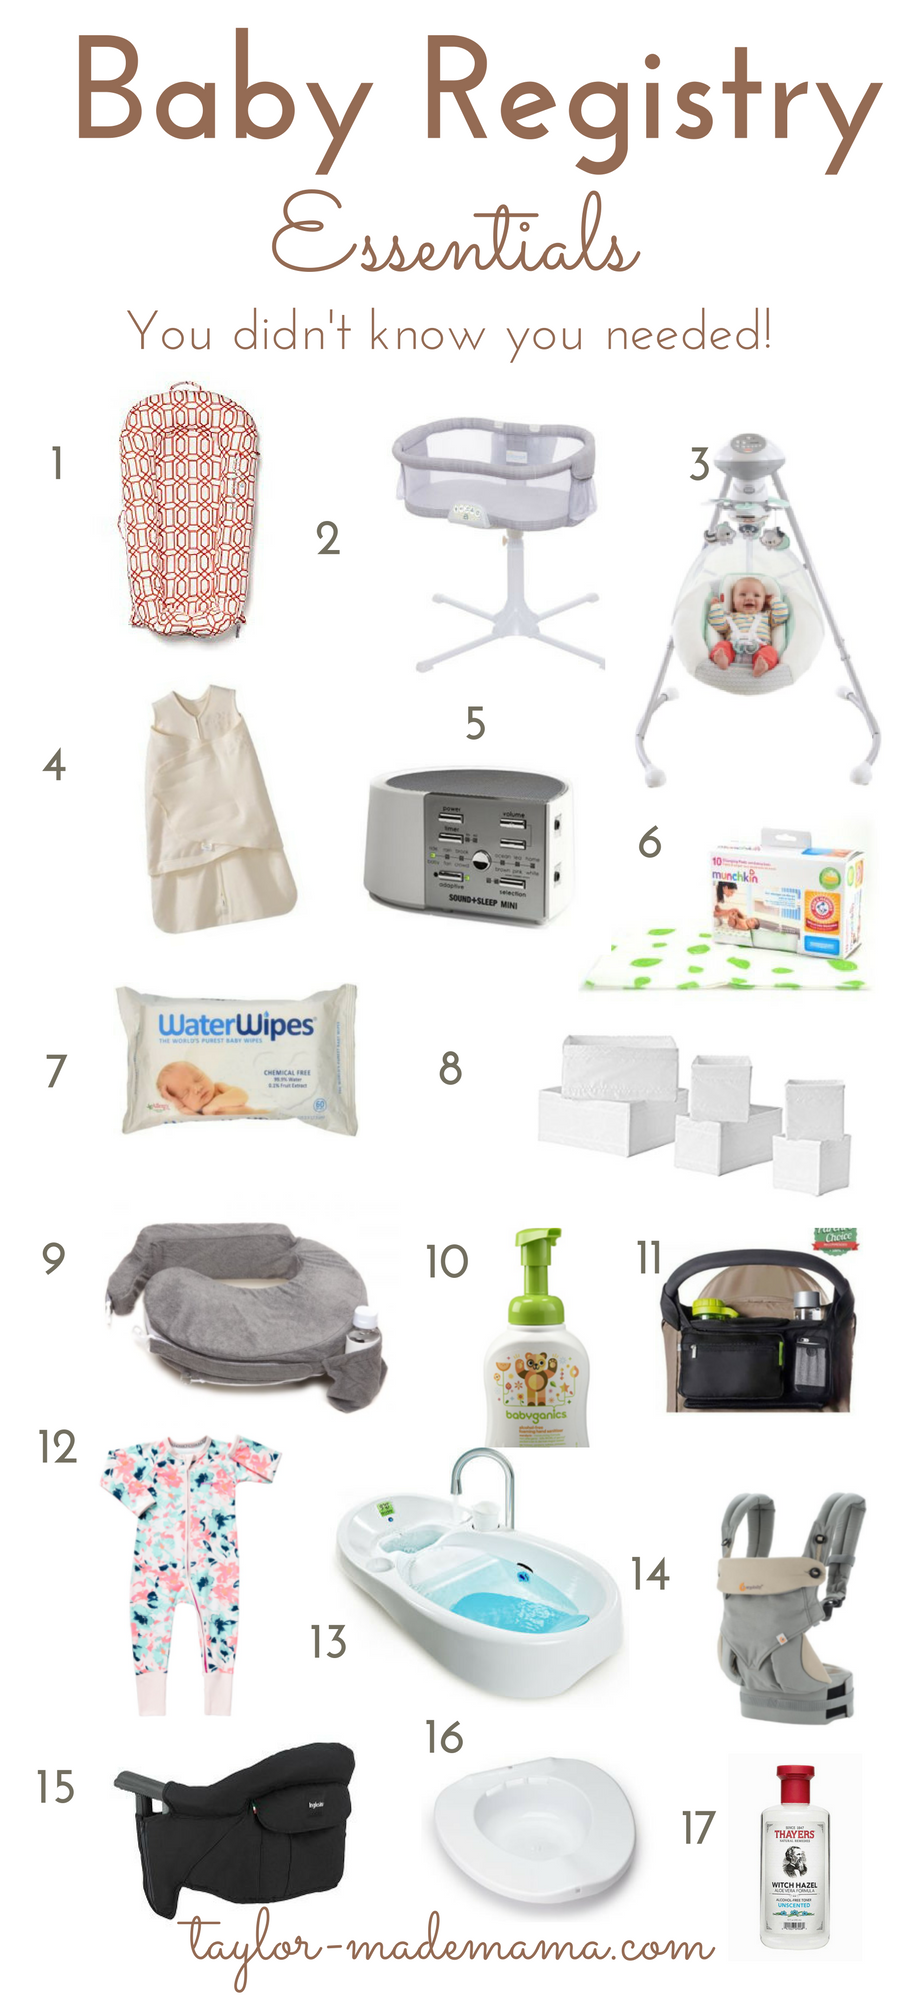 https://taylor-mademama.com/wp-content/uploads/2016/06/Baby-registry-2.png